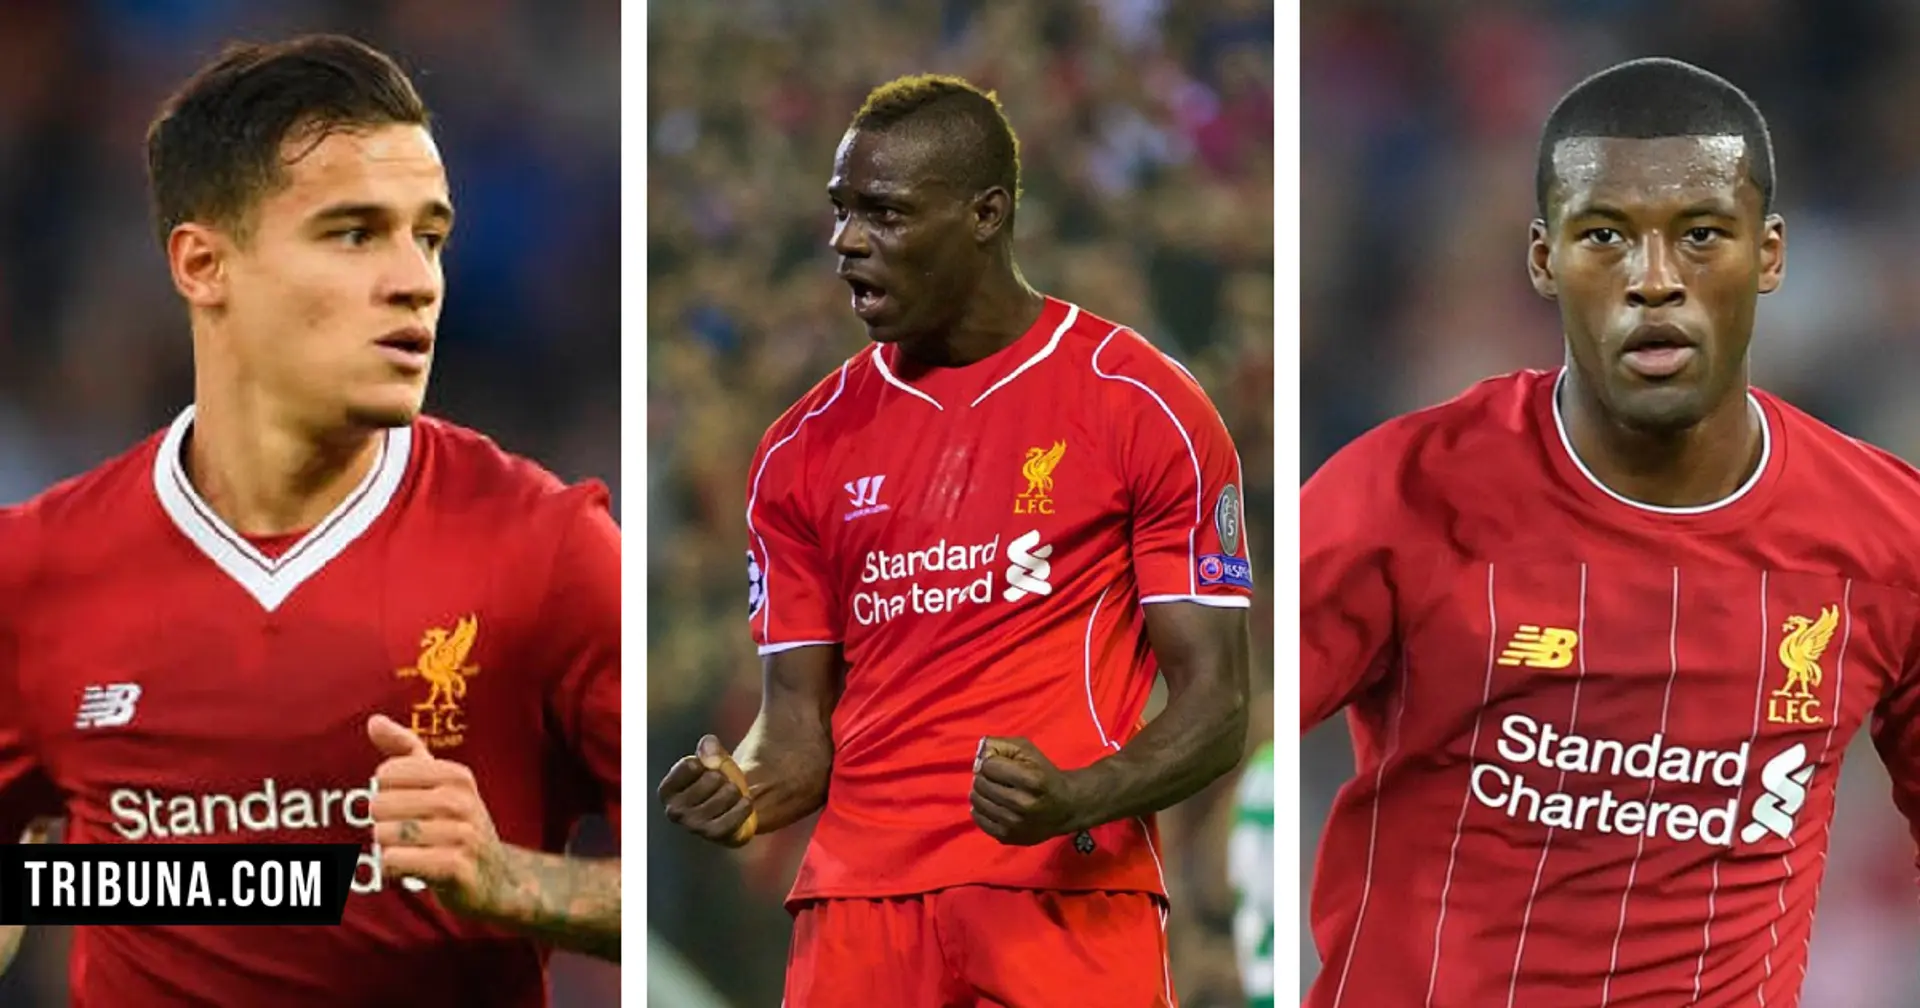 Coutinho, Balotelli and more: 5 players from FM 2011 U21 wonderkid list played for Liverpool